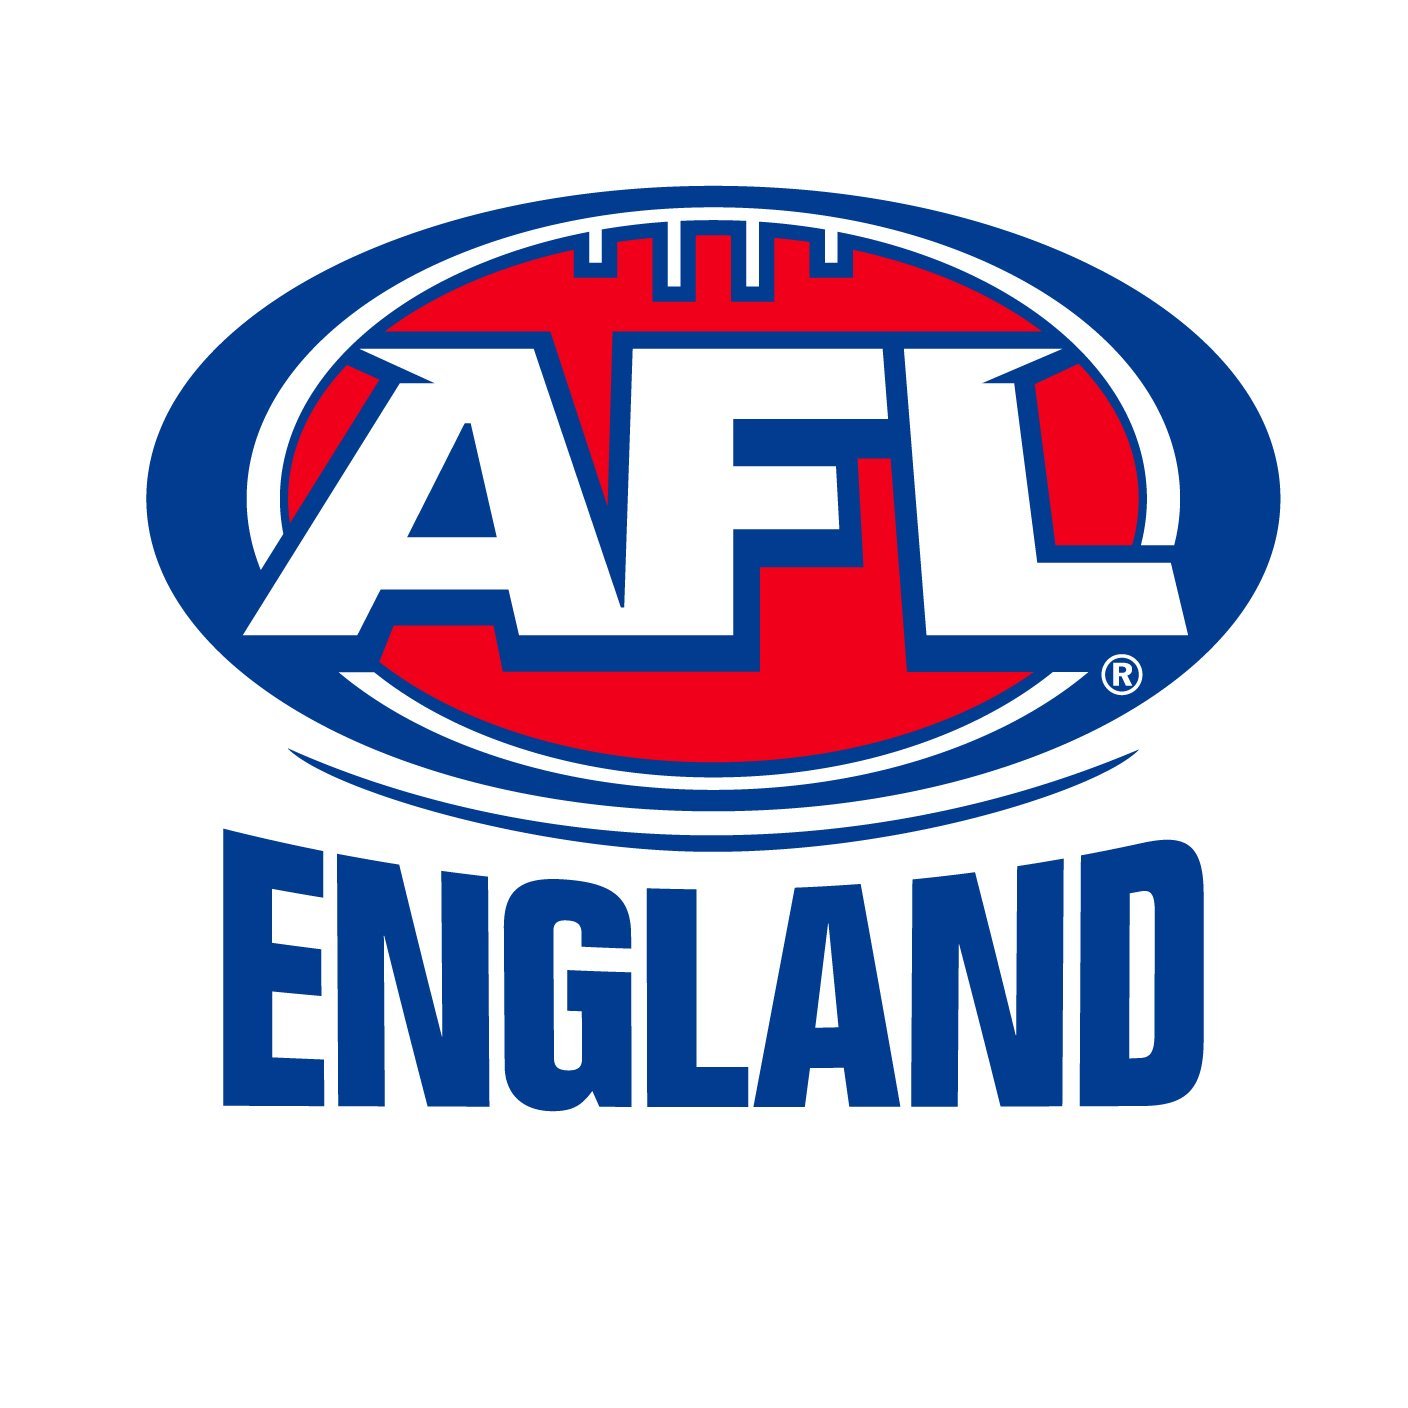 Working to grow the sport of Australian Rules Football across the country - Email: aflengland@gmail.com - National teams: @EngDragonslayer & @EnglandVixens